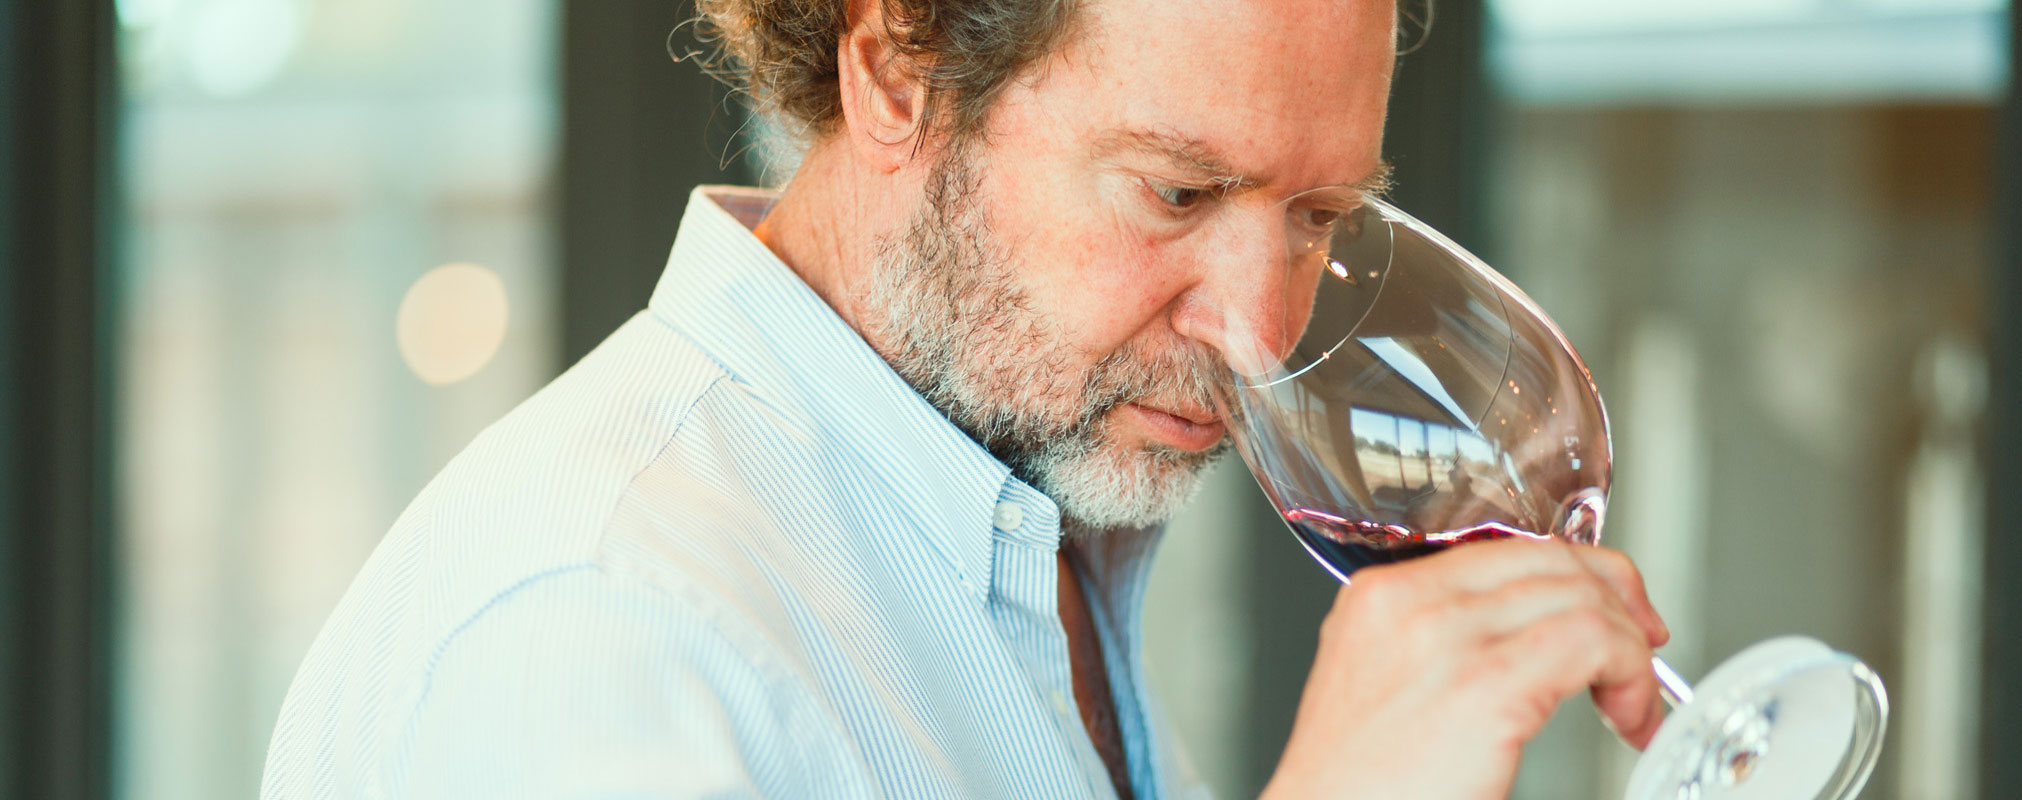 A in creating terroir-driven wines